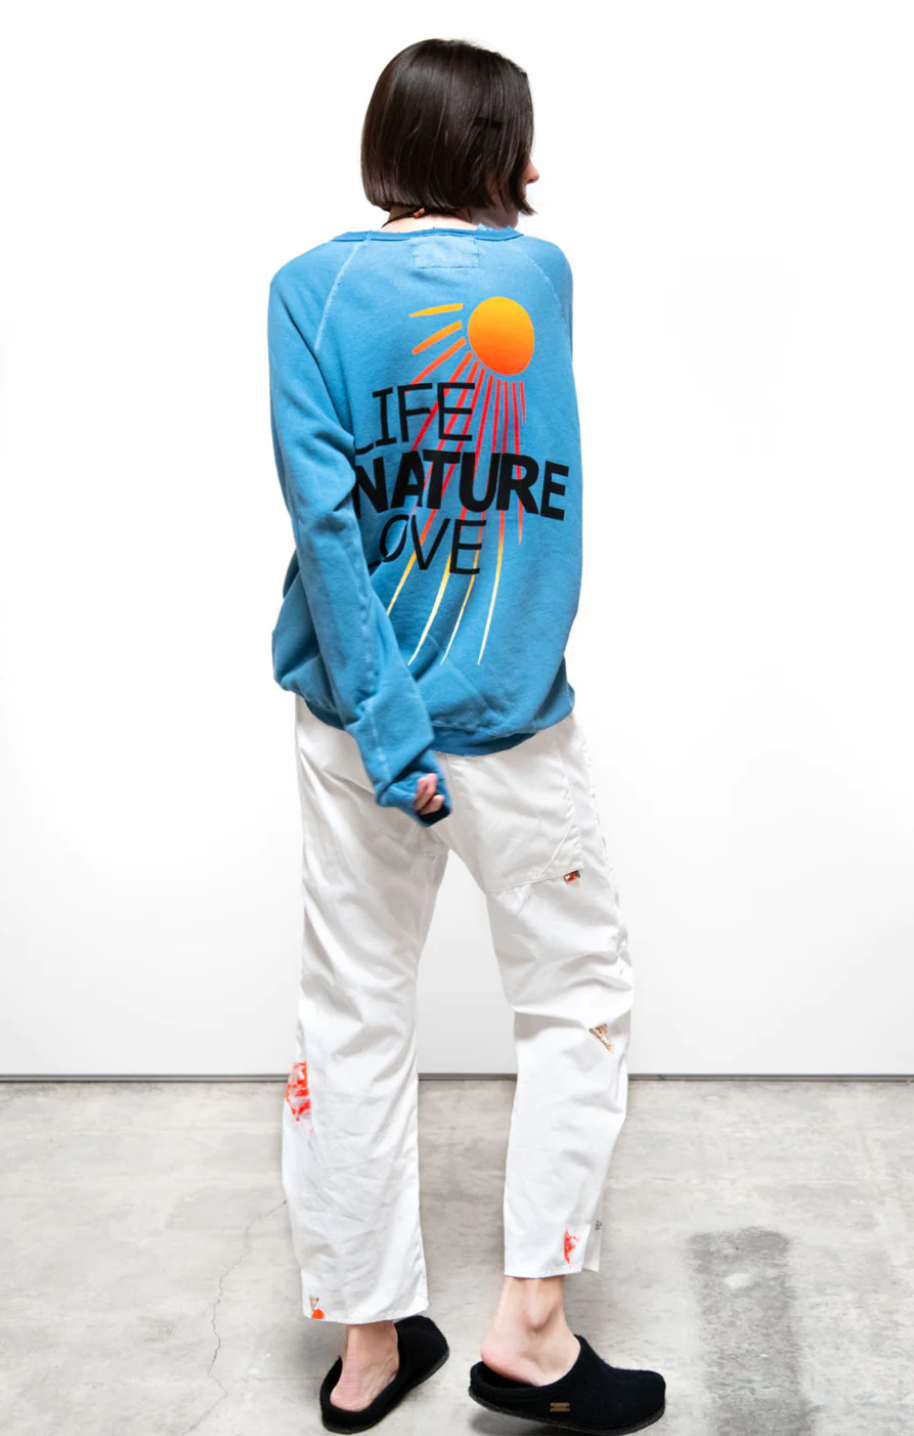 A person stands with their back towards the camera, wearing a LNLSUN SUPERYUMM BIGGIE raglan sweatshirt from Free City (sparrow, LLC) with the text &quot;LIFE, NATURE, LOVE&quot; and a graphic of a sun, paired with white, distressed jeans and black slippers in Arizona style.